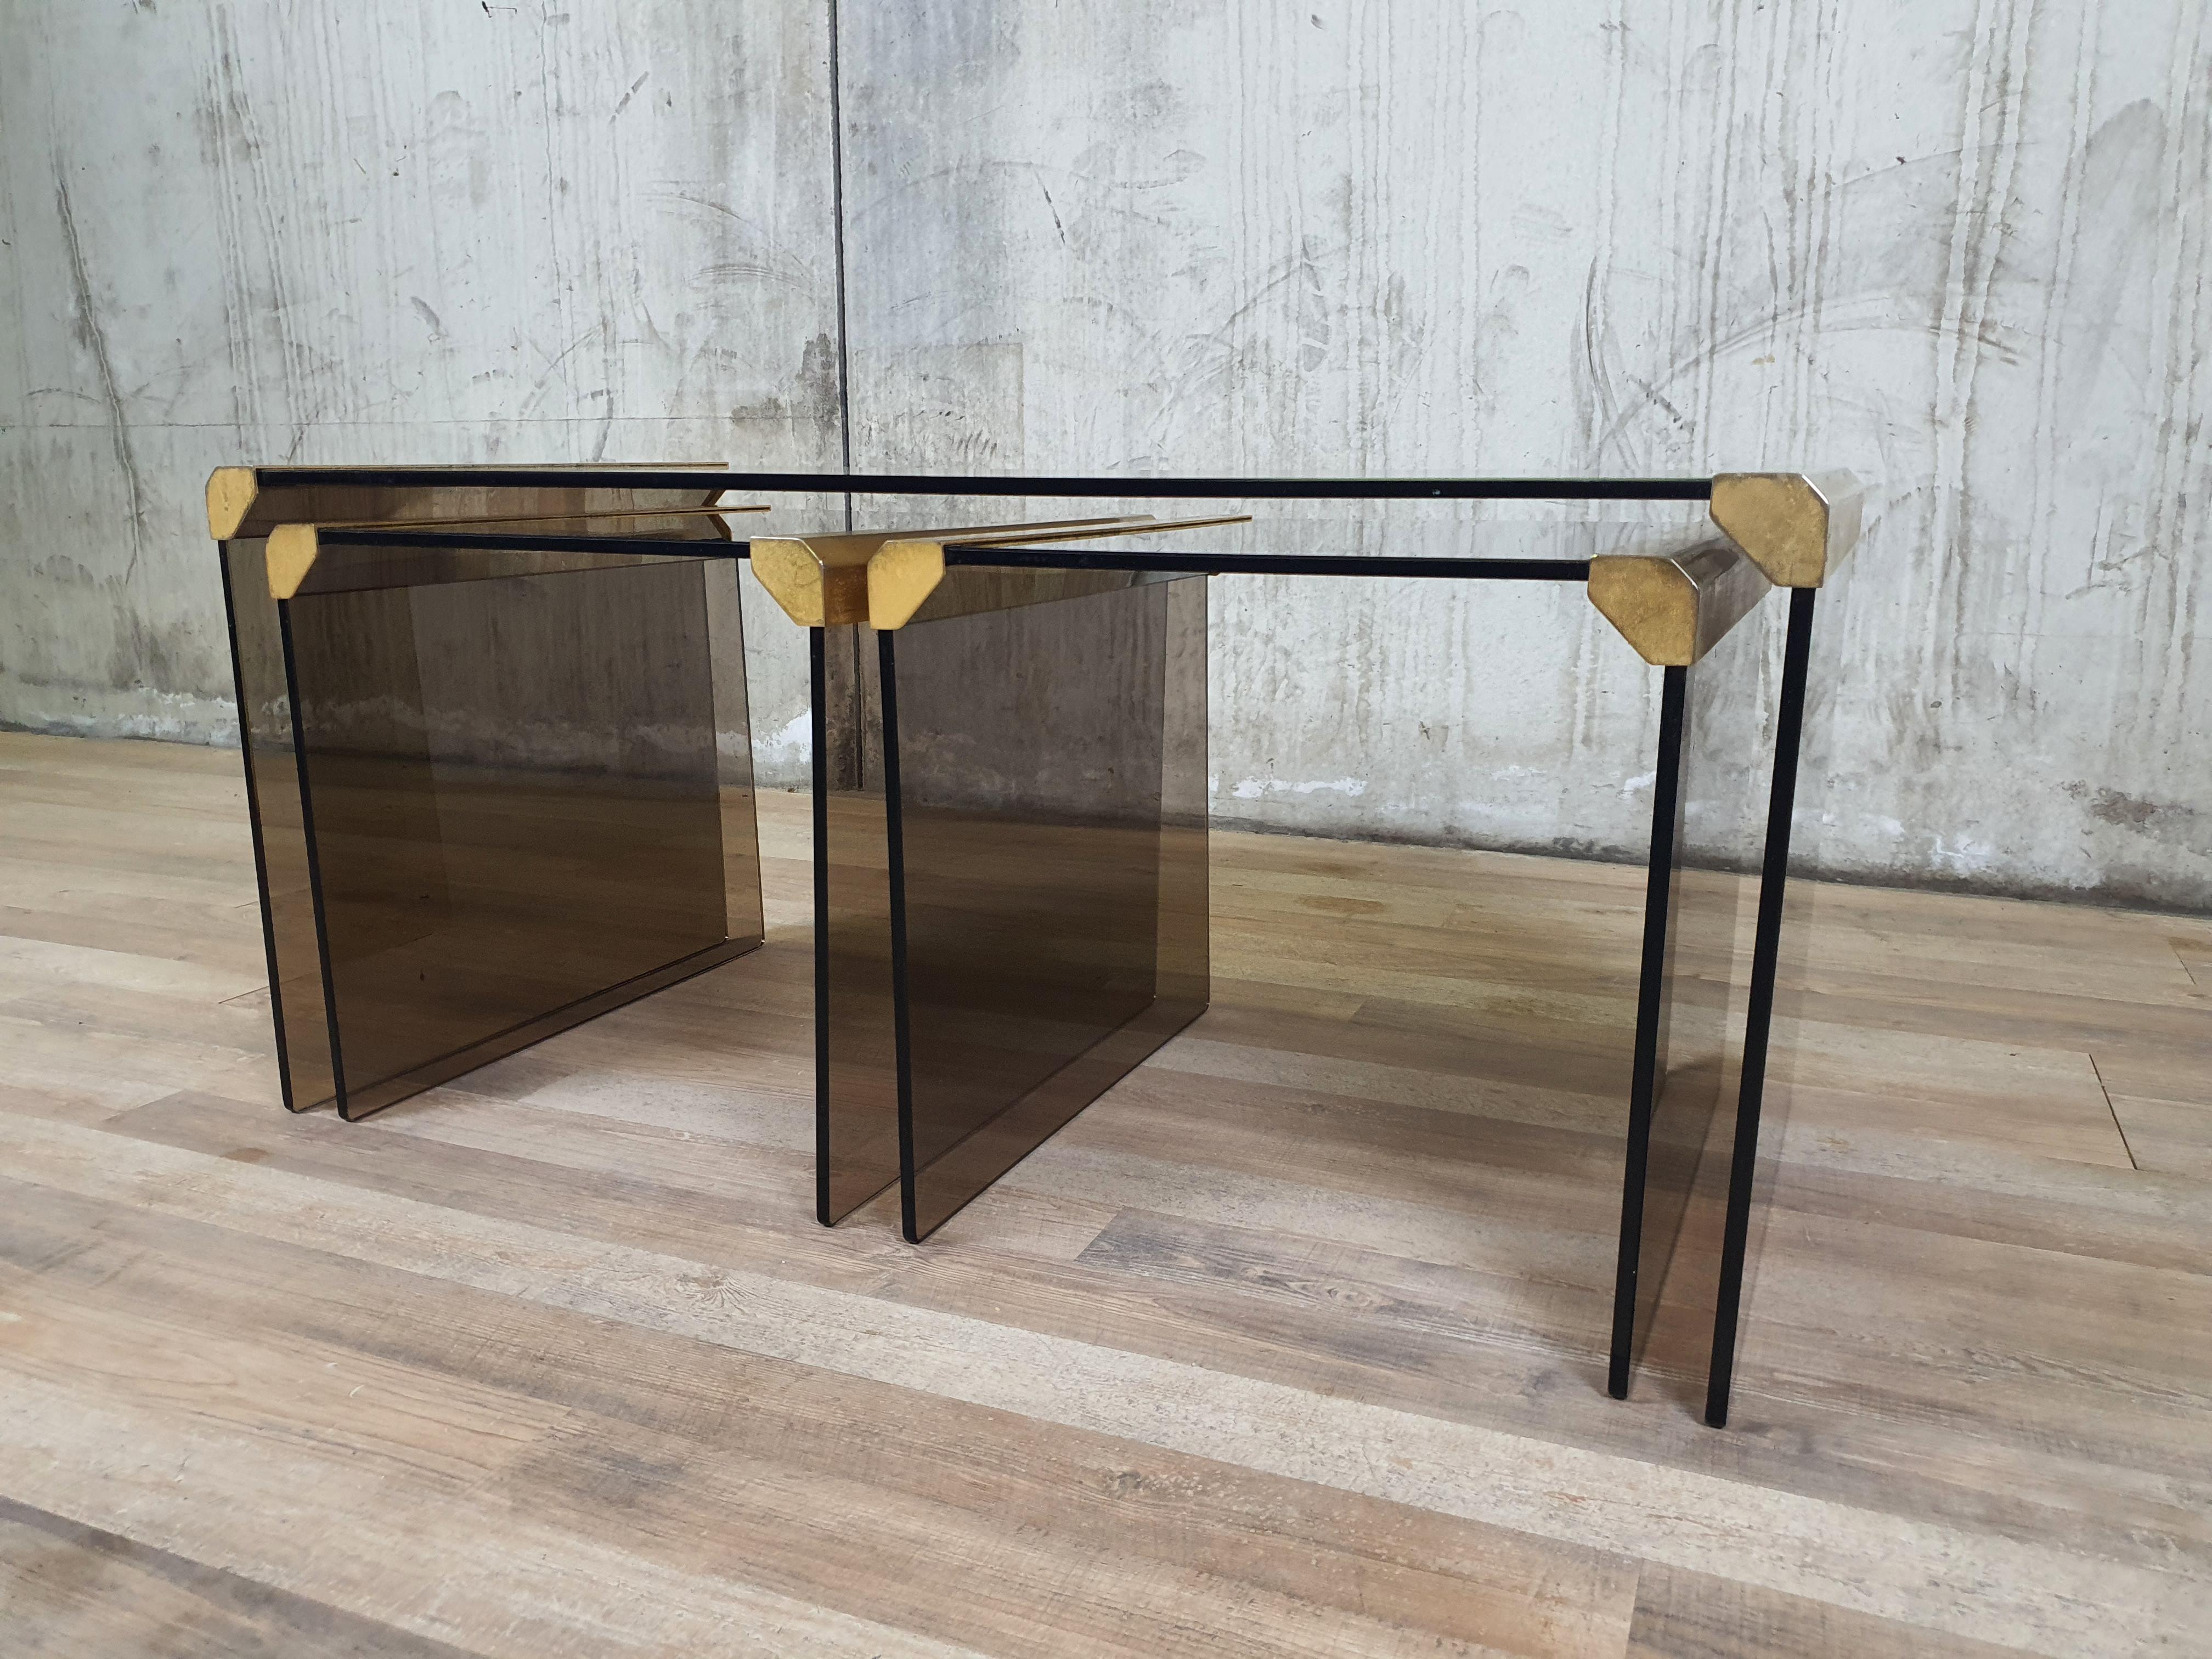 Italian Steel and Smoked Glass Coffee Tables by P. Gallotti for Gallotti & Radice For Sale